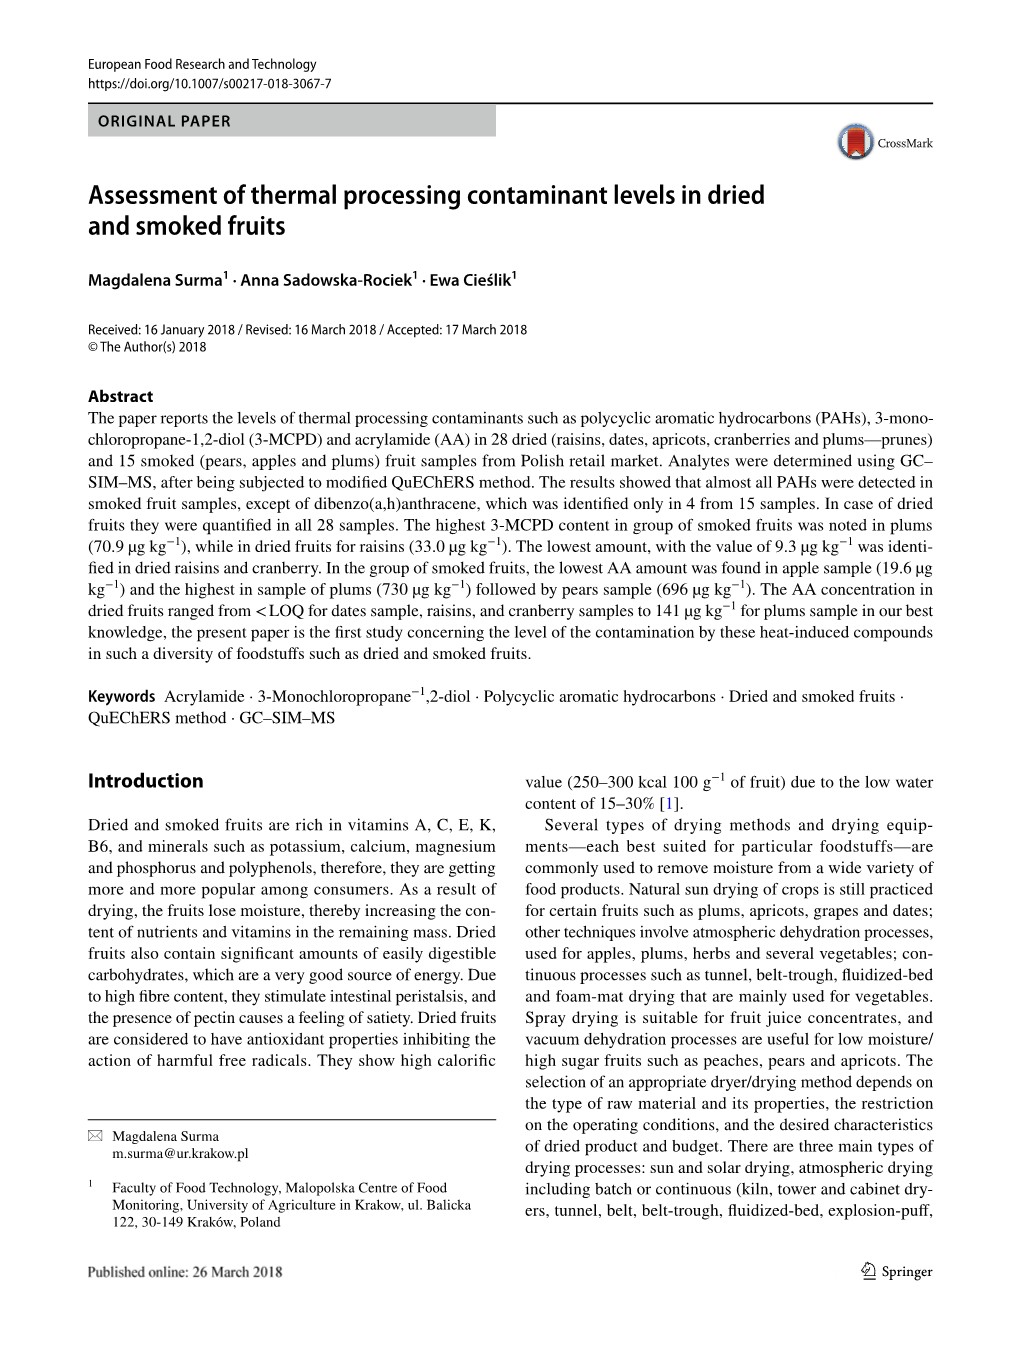 Assessment of Thermal Processing Contaminant Levels in Dried and Smoked Fruits